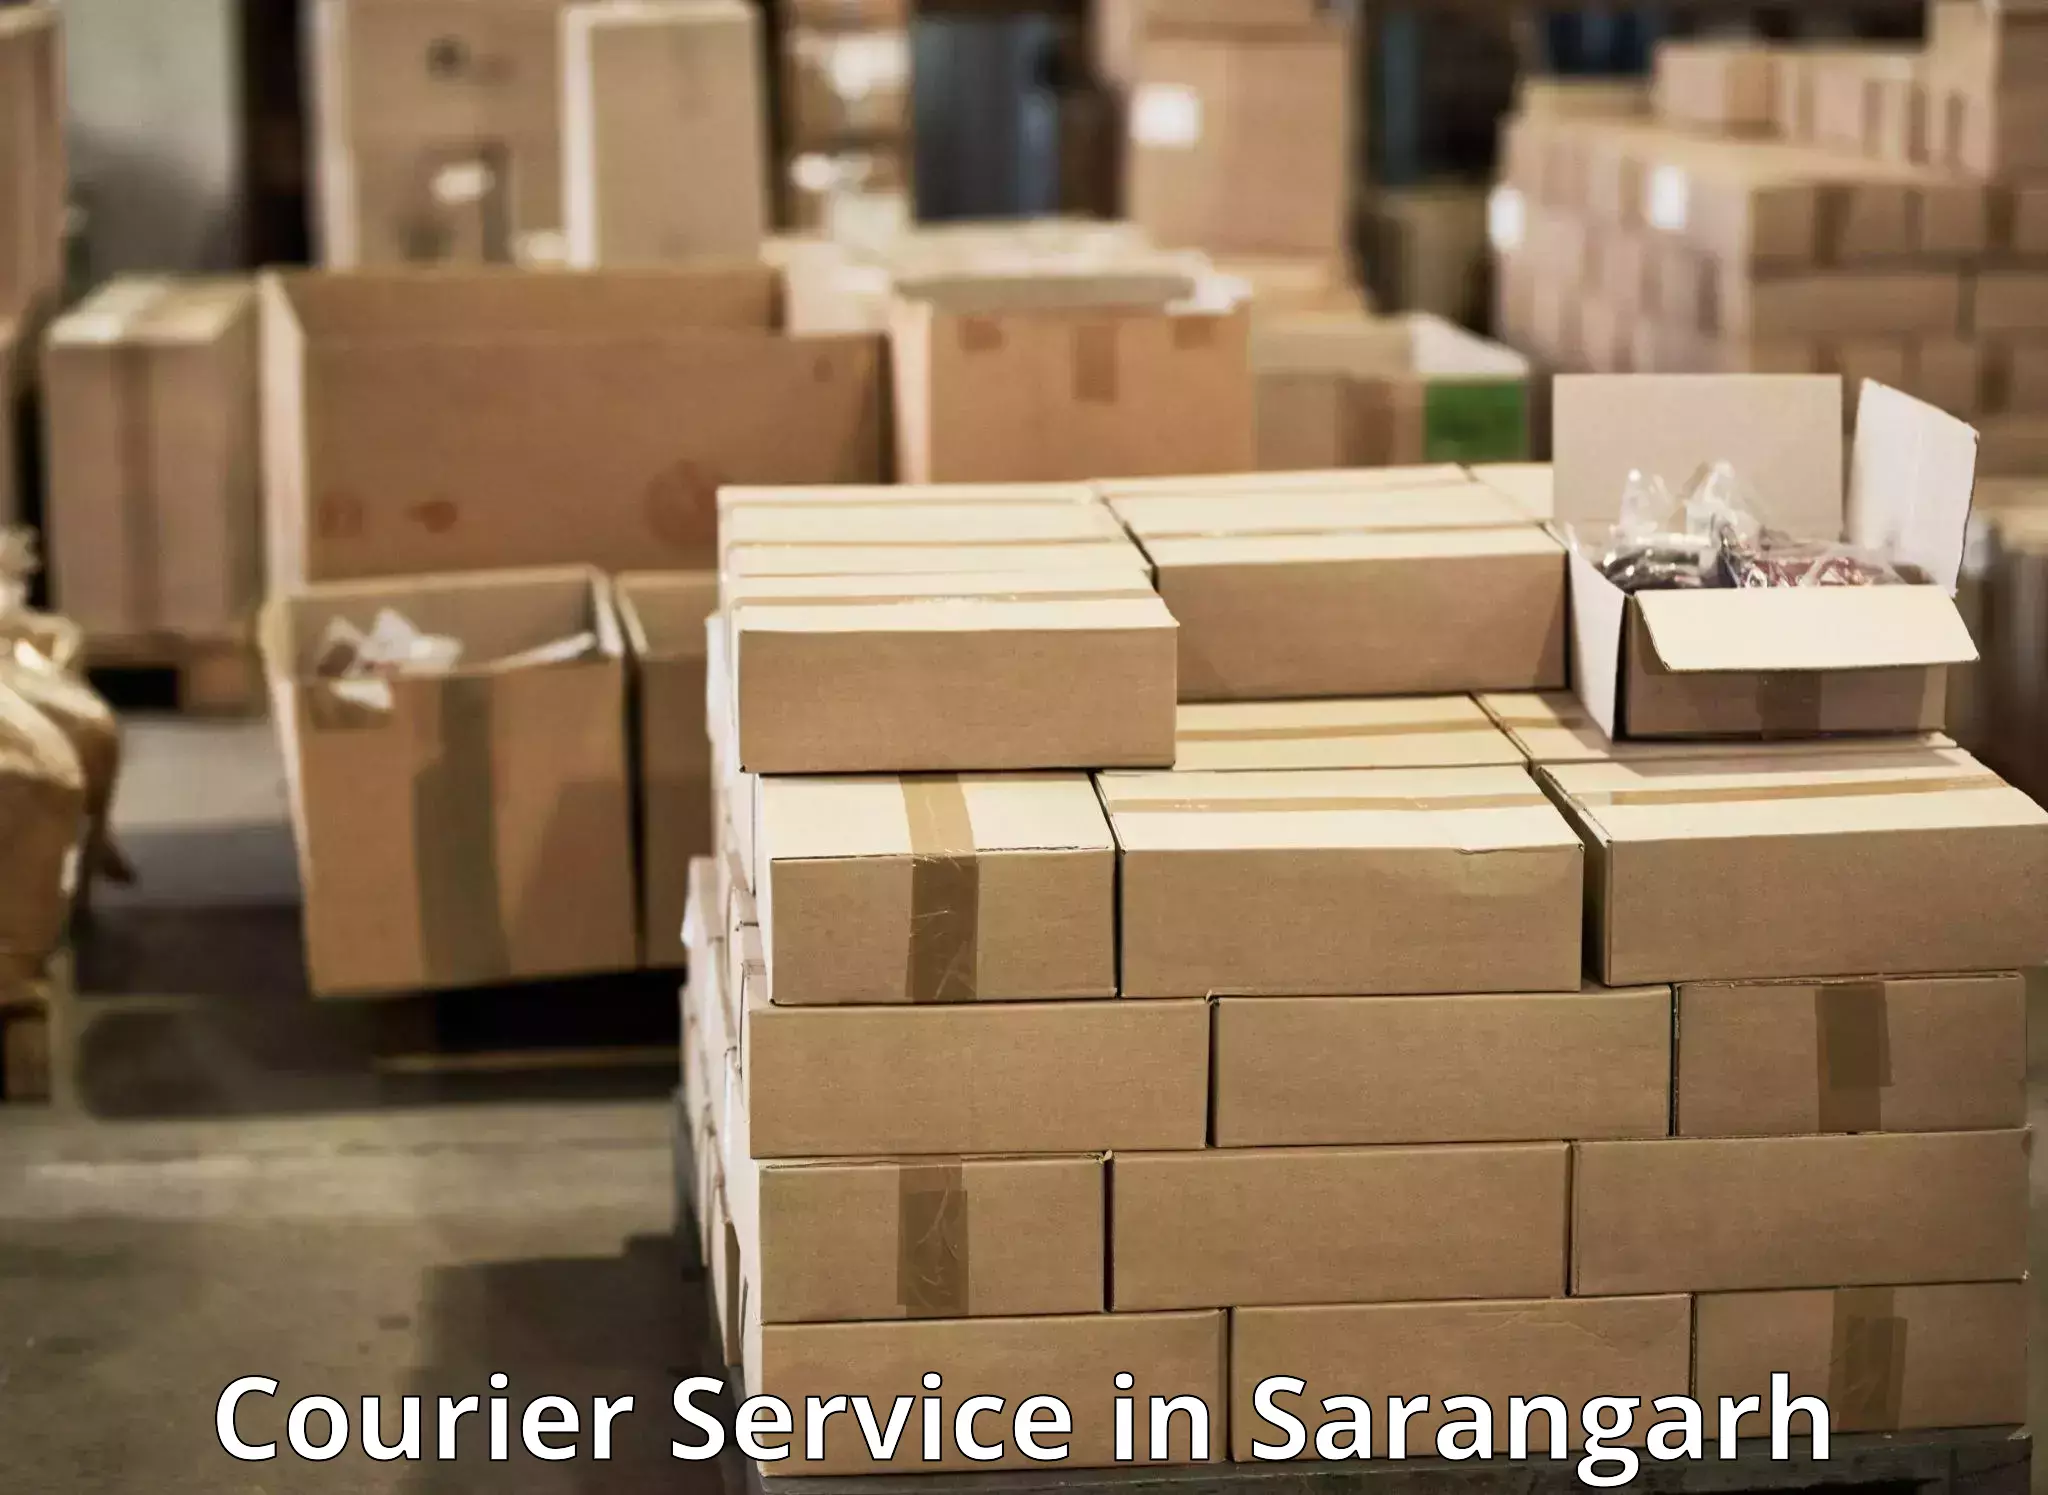 Optimized delivery routes in Sarangarh